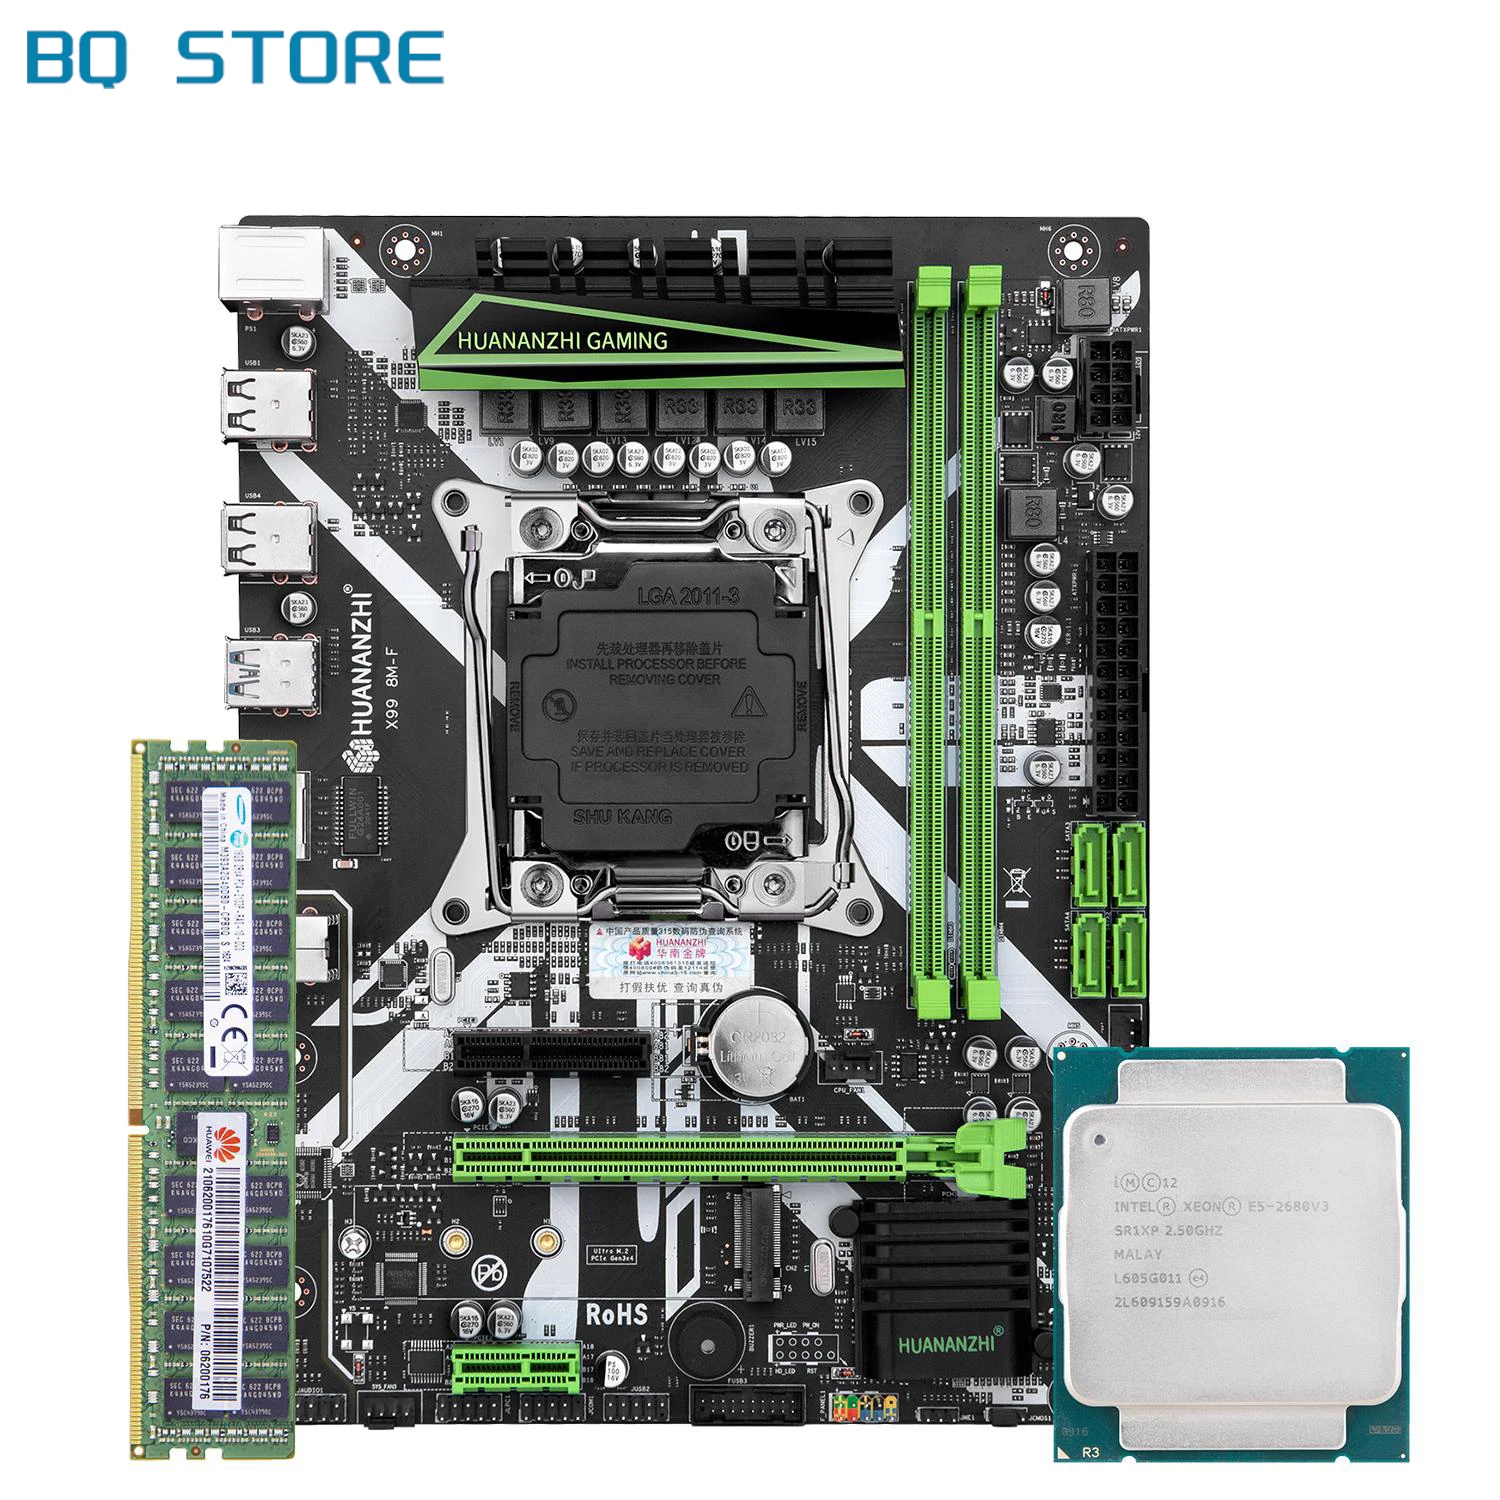 

HUANANZHI X99 8M F X99 Motherboard with Intel XEON E5 2680 V3 with 1*16G DDR4 RECC memory combo kit set NVME USB3.0 Server